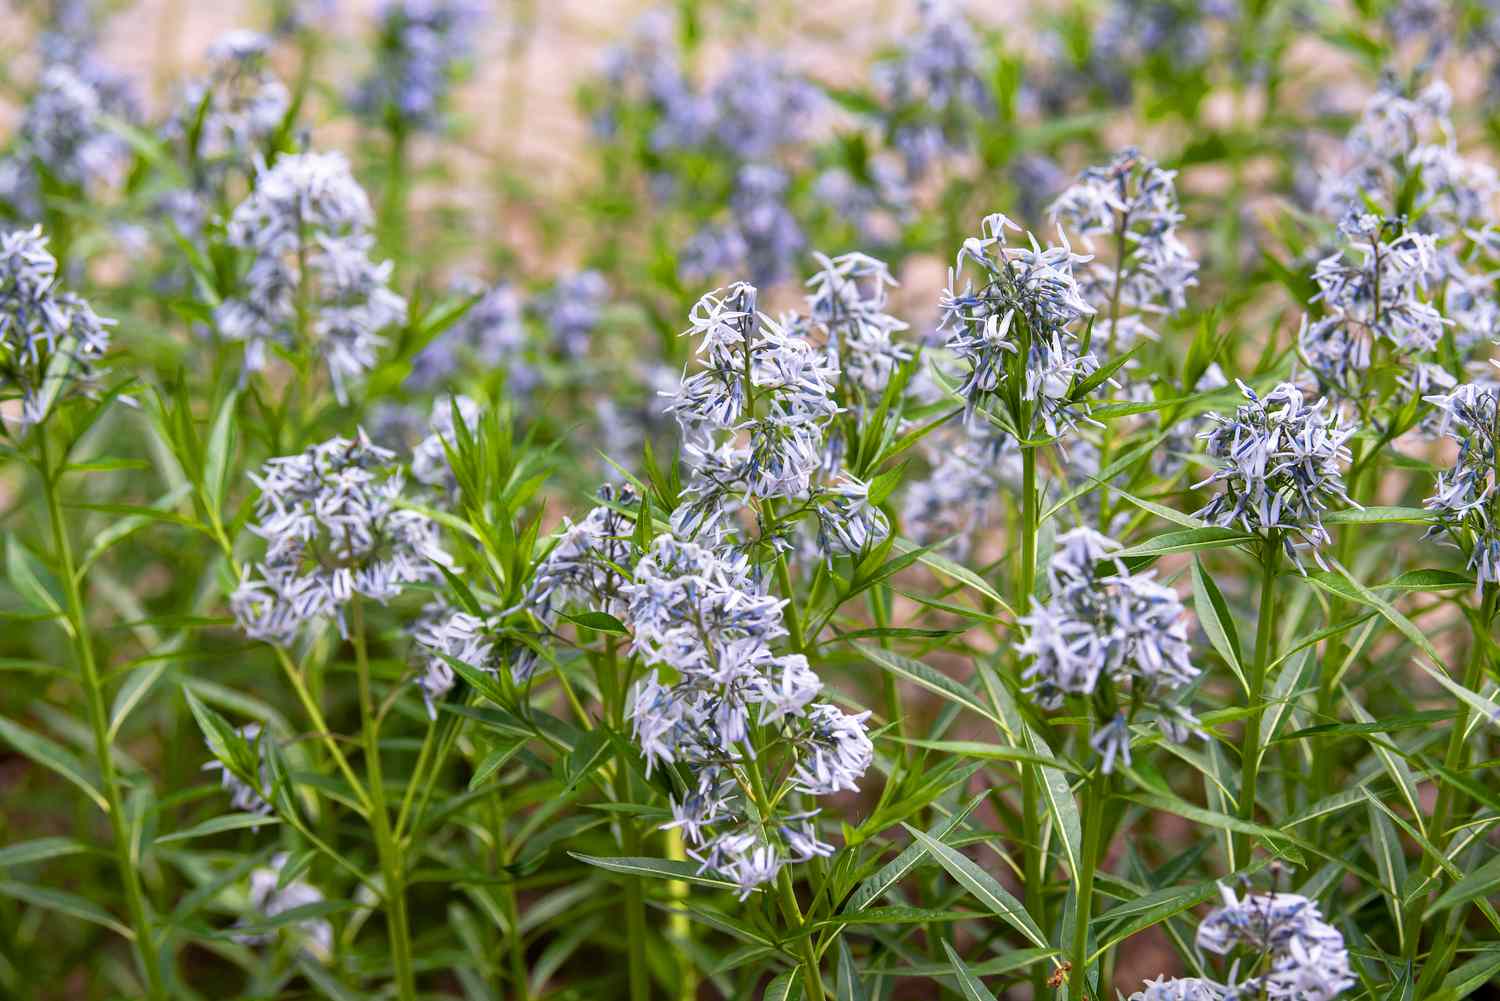 Blue star plant with tiny light blue-purple flower clusters with grass-like leaves